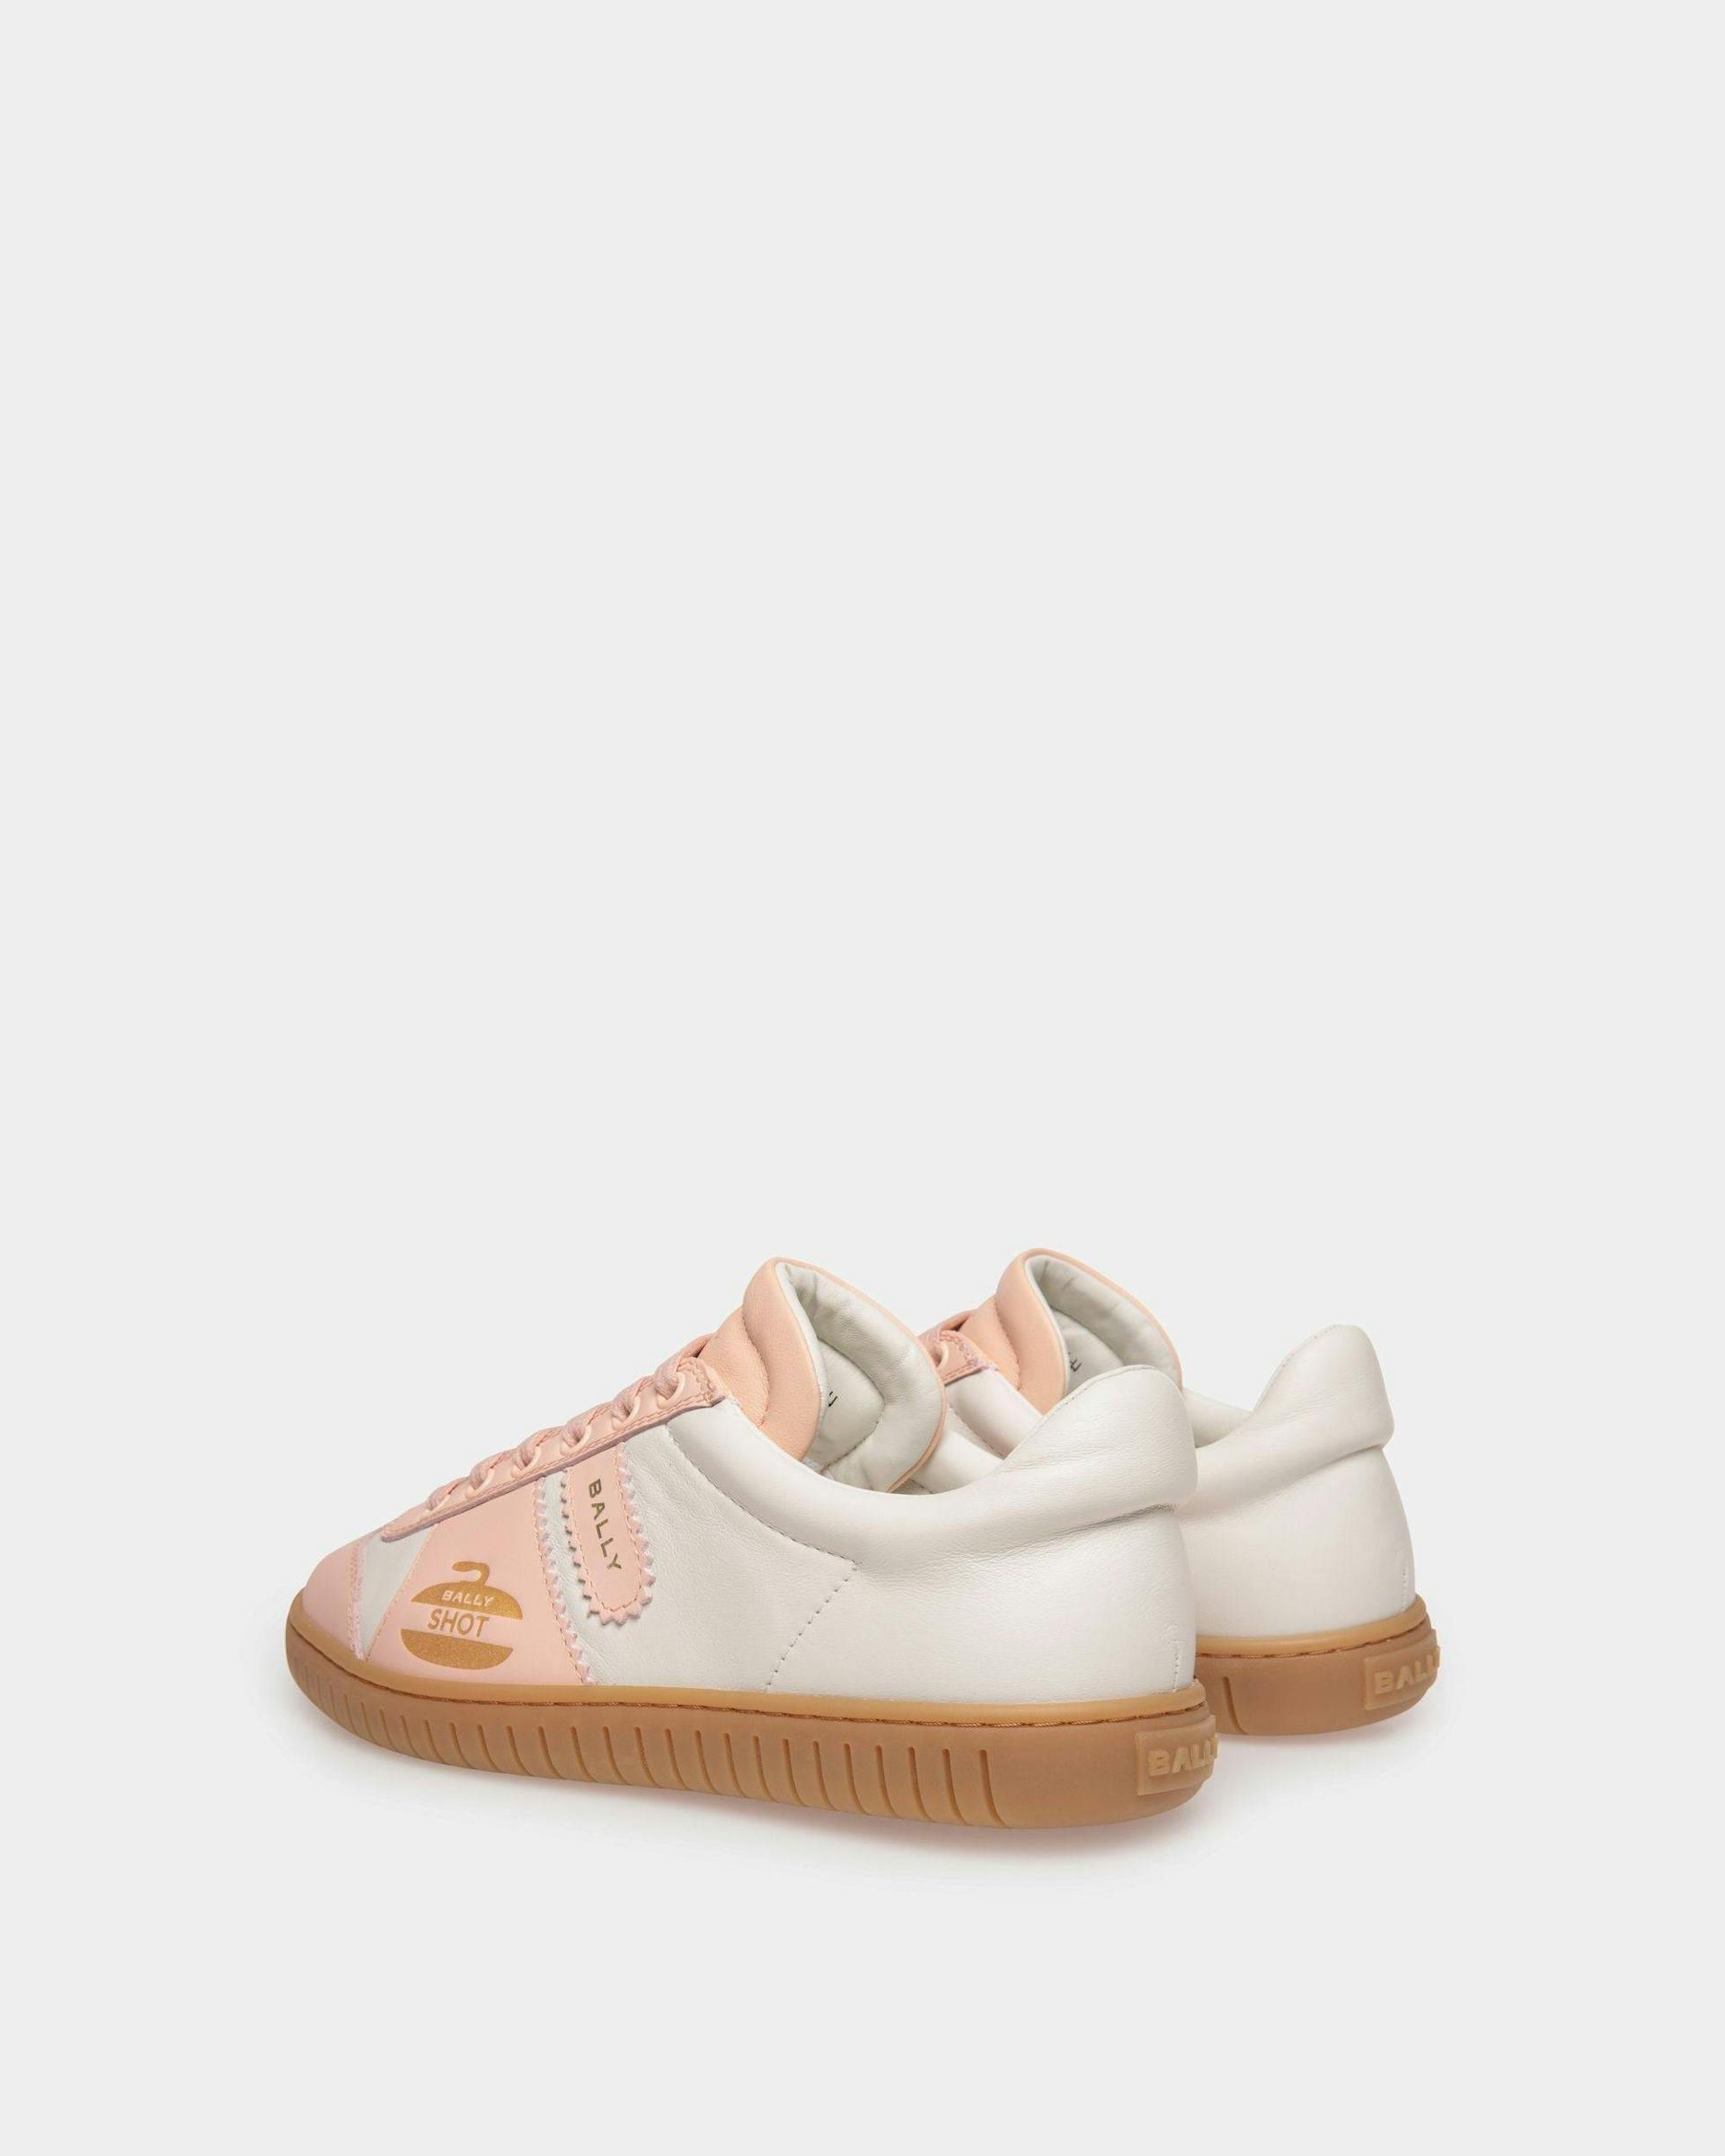 Women's Player Sneaker in White and Baby Pink Leather | Bally | Still Life 3/4 Back